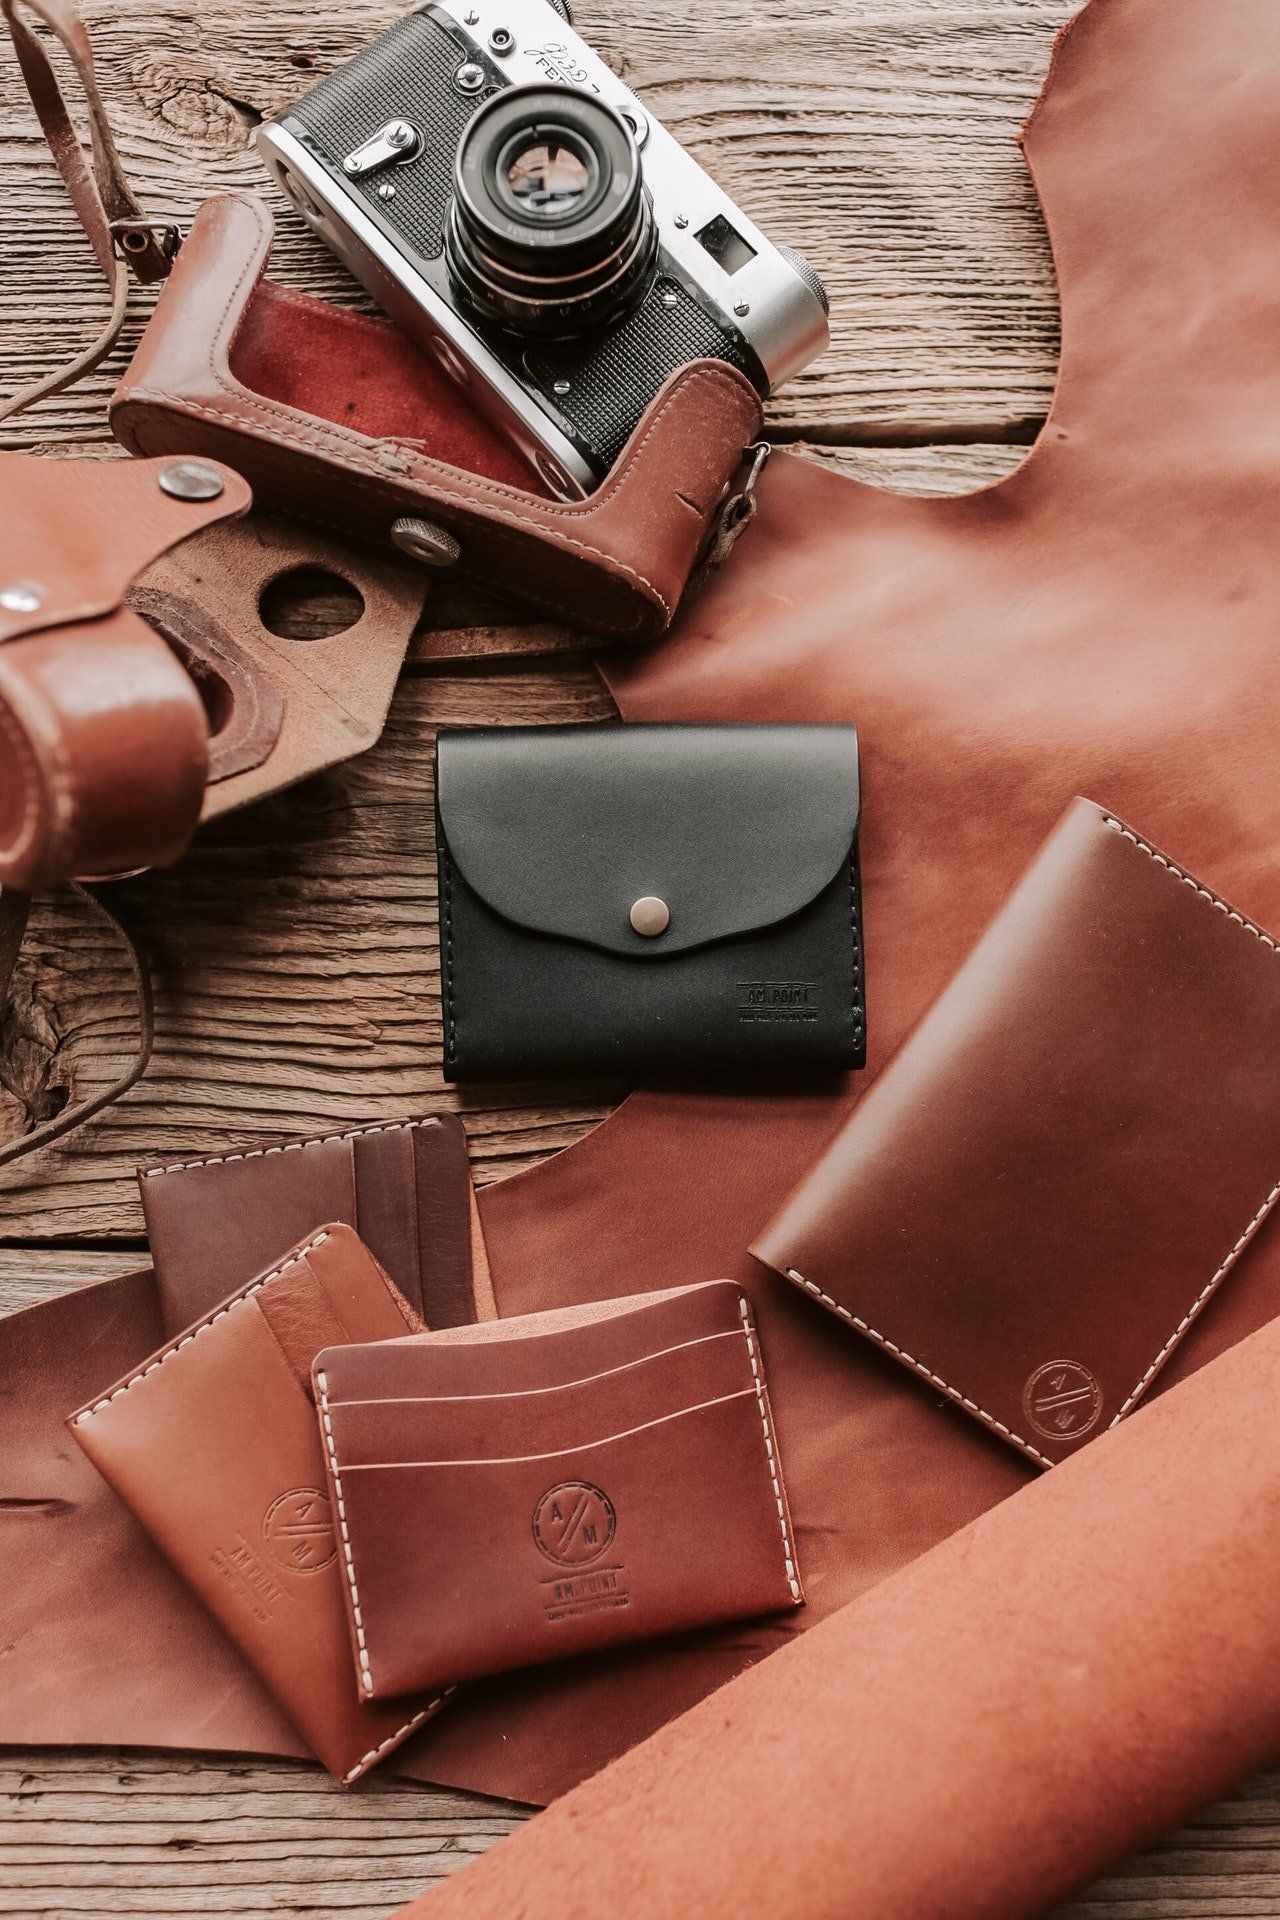 Your own value network for the leather good industry